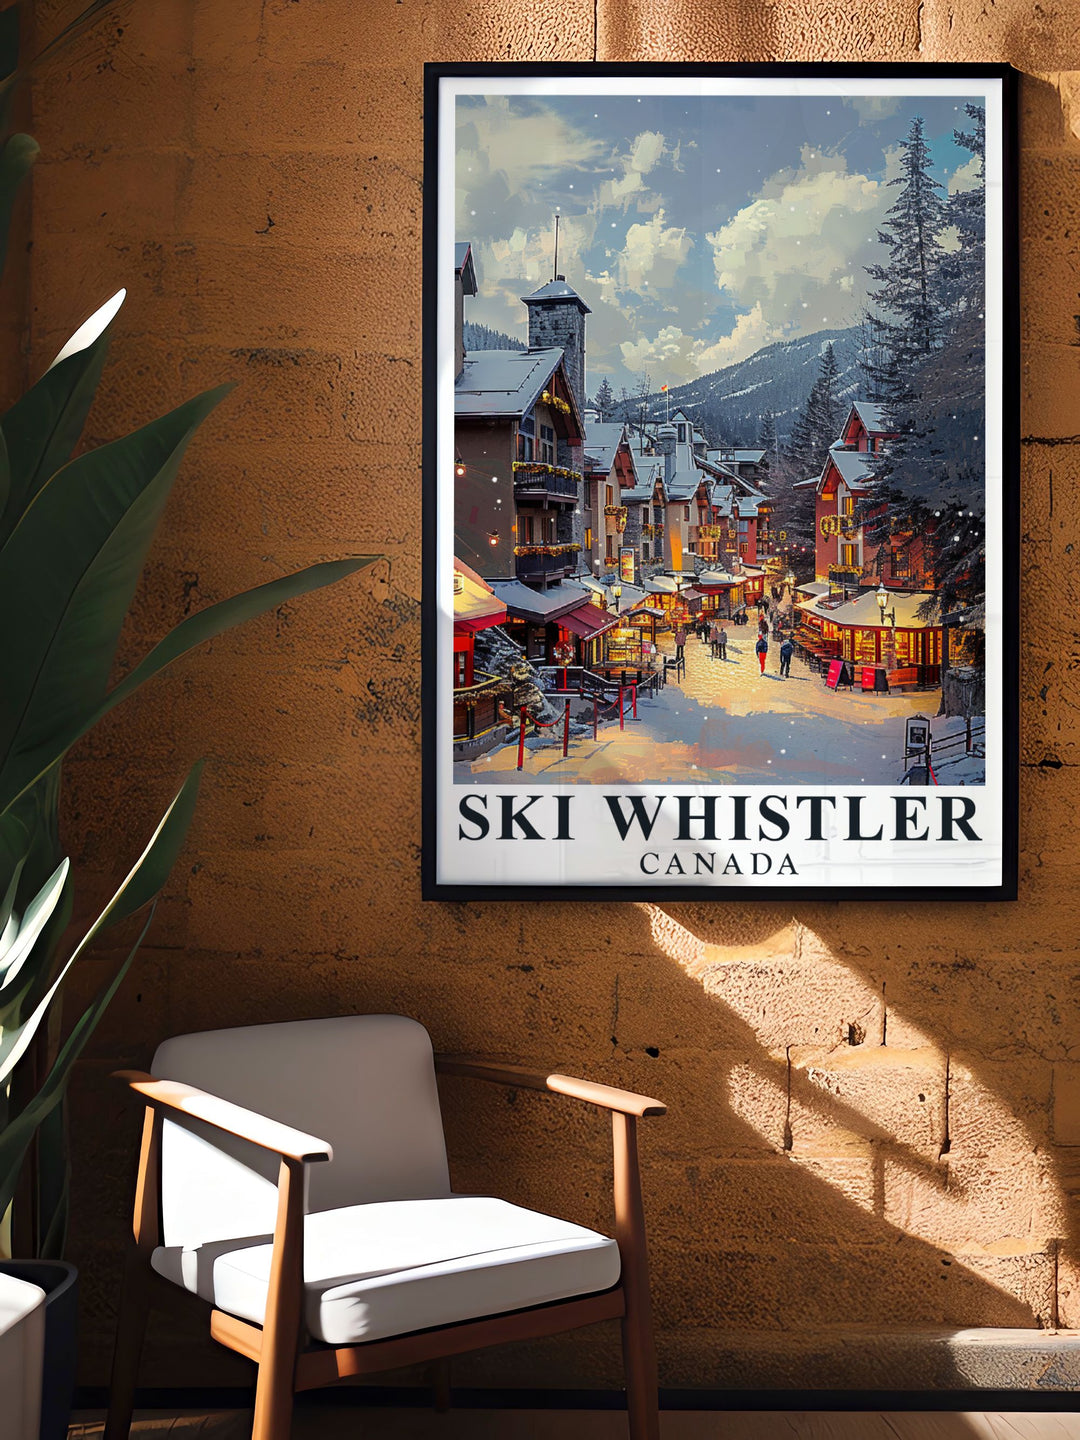 This travel poster highlights the serene beauty of Whistler Ski Resort and the lively atmosphere of Whistler Village, showcasing the natural wonders and vibrant culture of British Columbia.